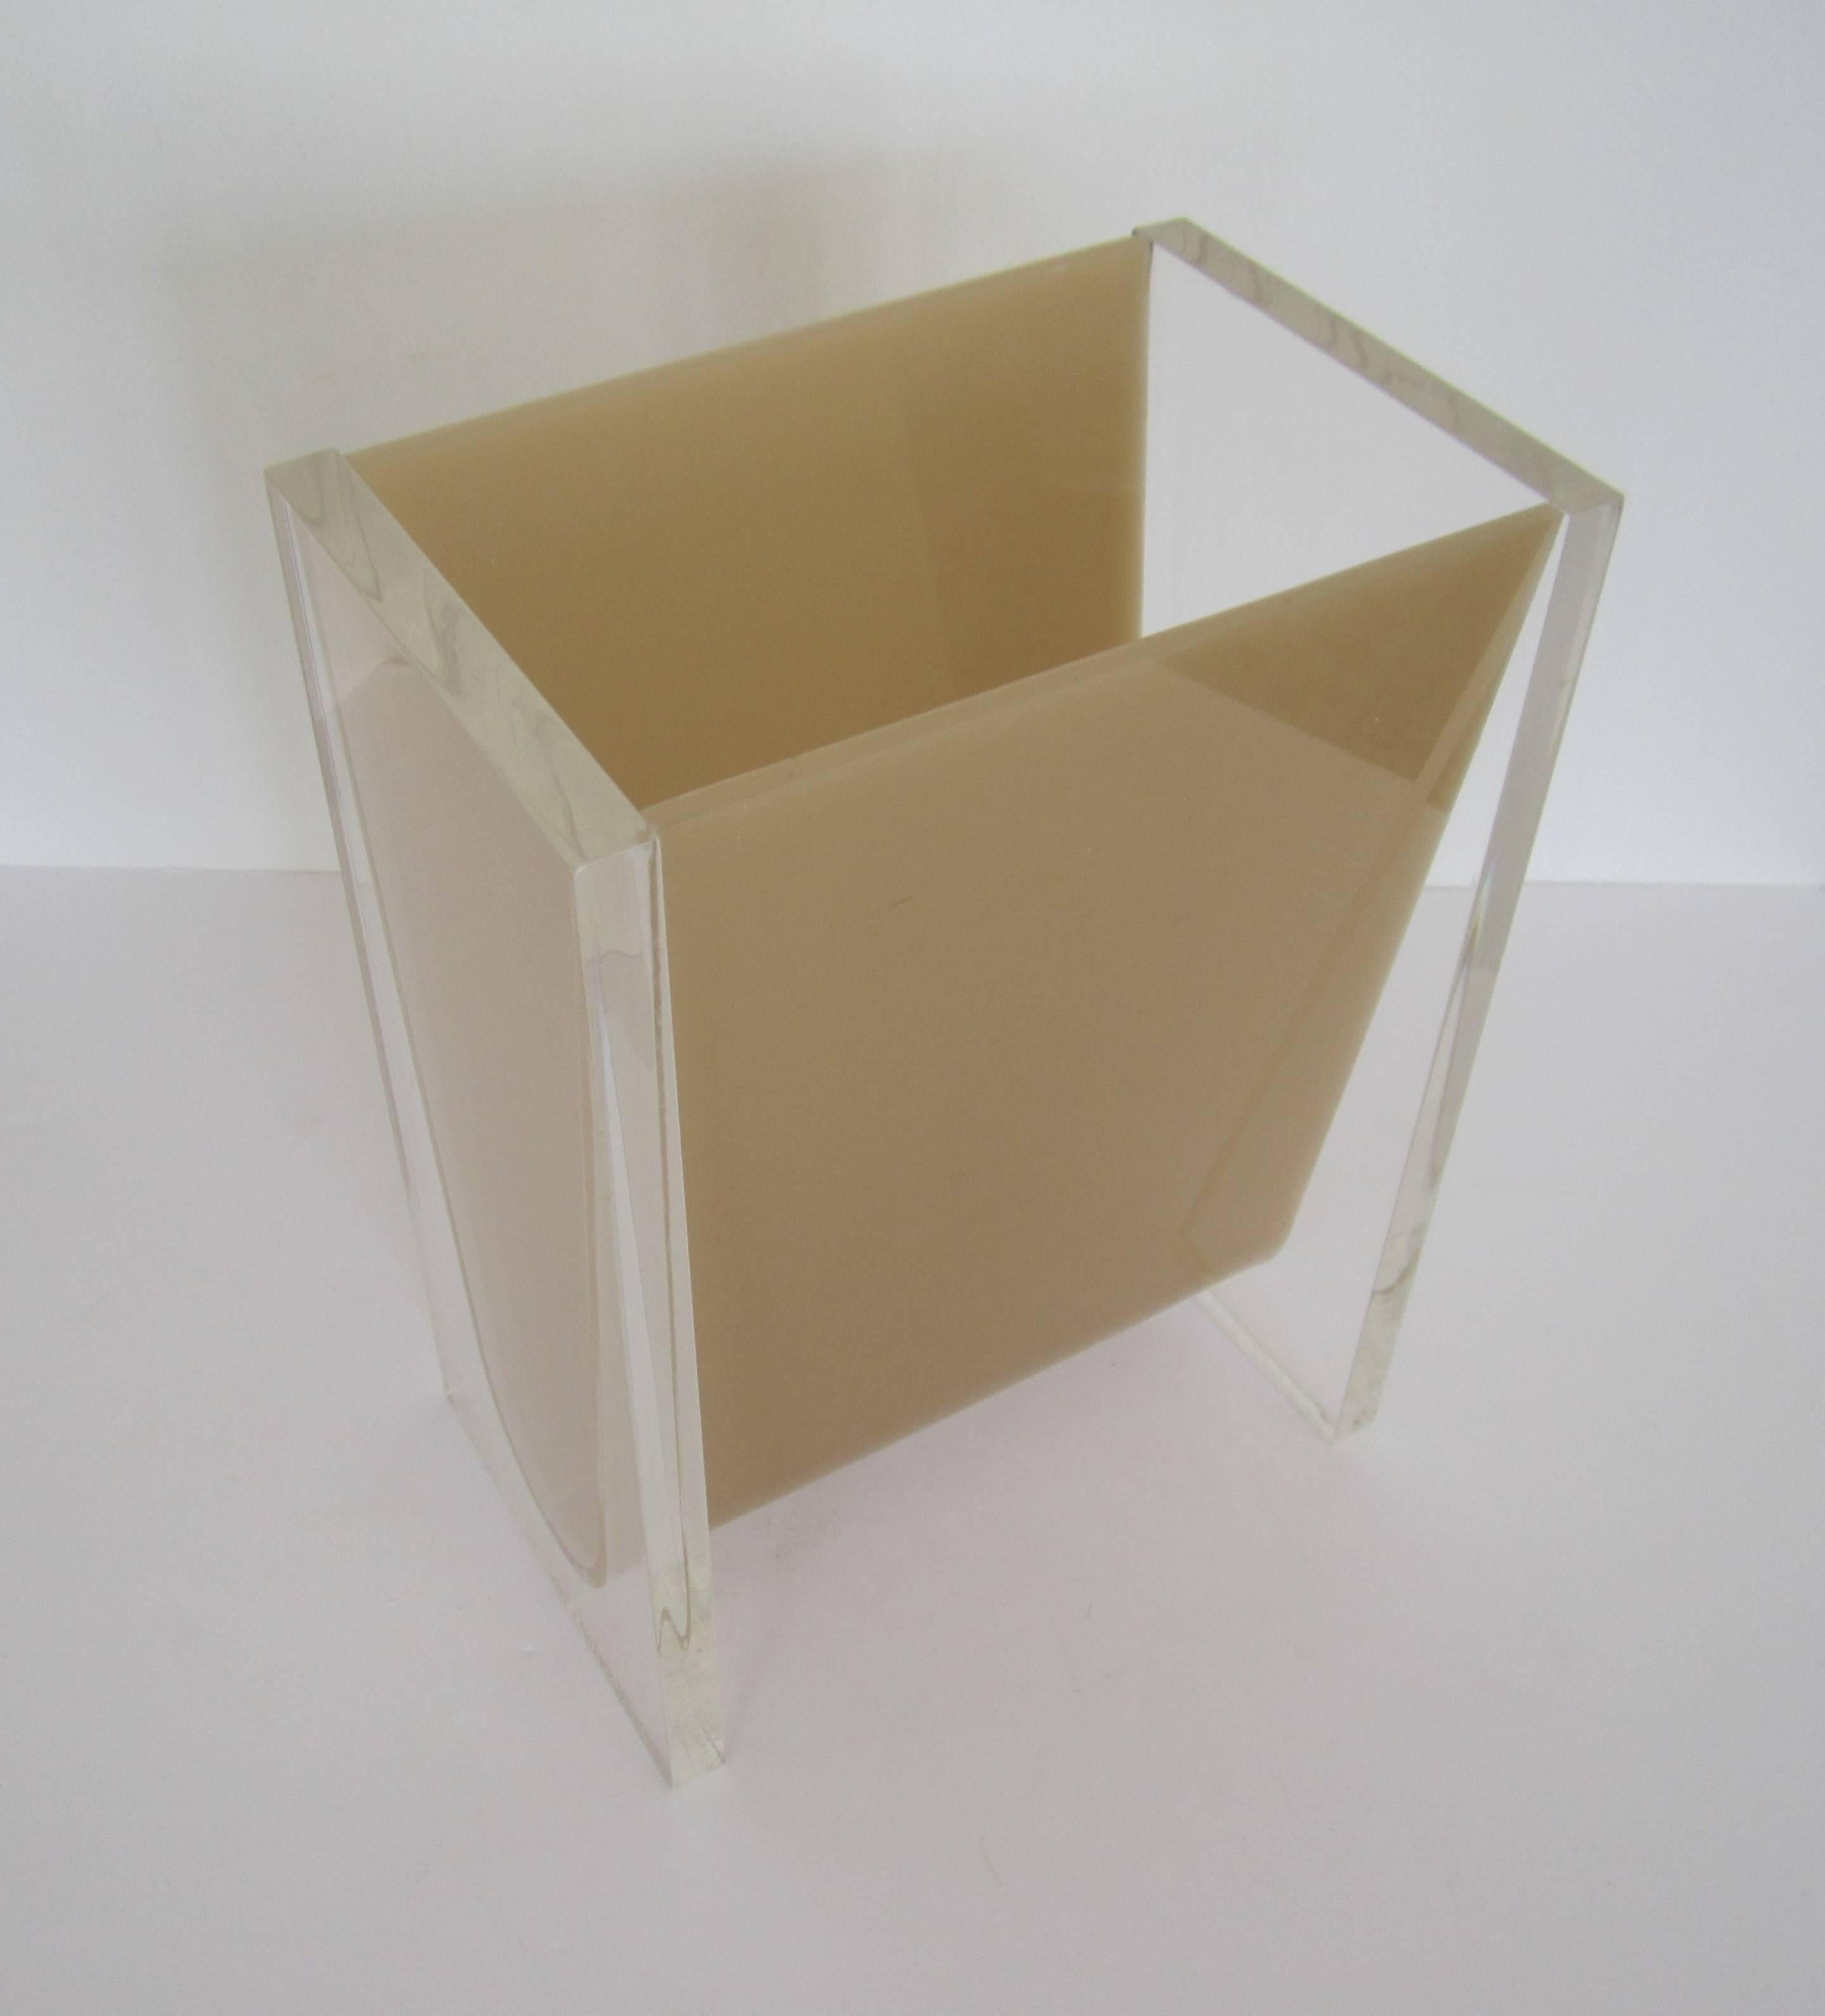 A vintage Lucite waste basket or trash can in the style of American Designer Charles Hollis Jones. Classic modern colors include clear Lucite rectangular ends with beige or tan acrylic center. Measurements include: 12